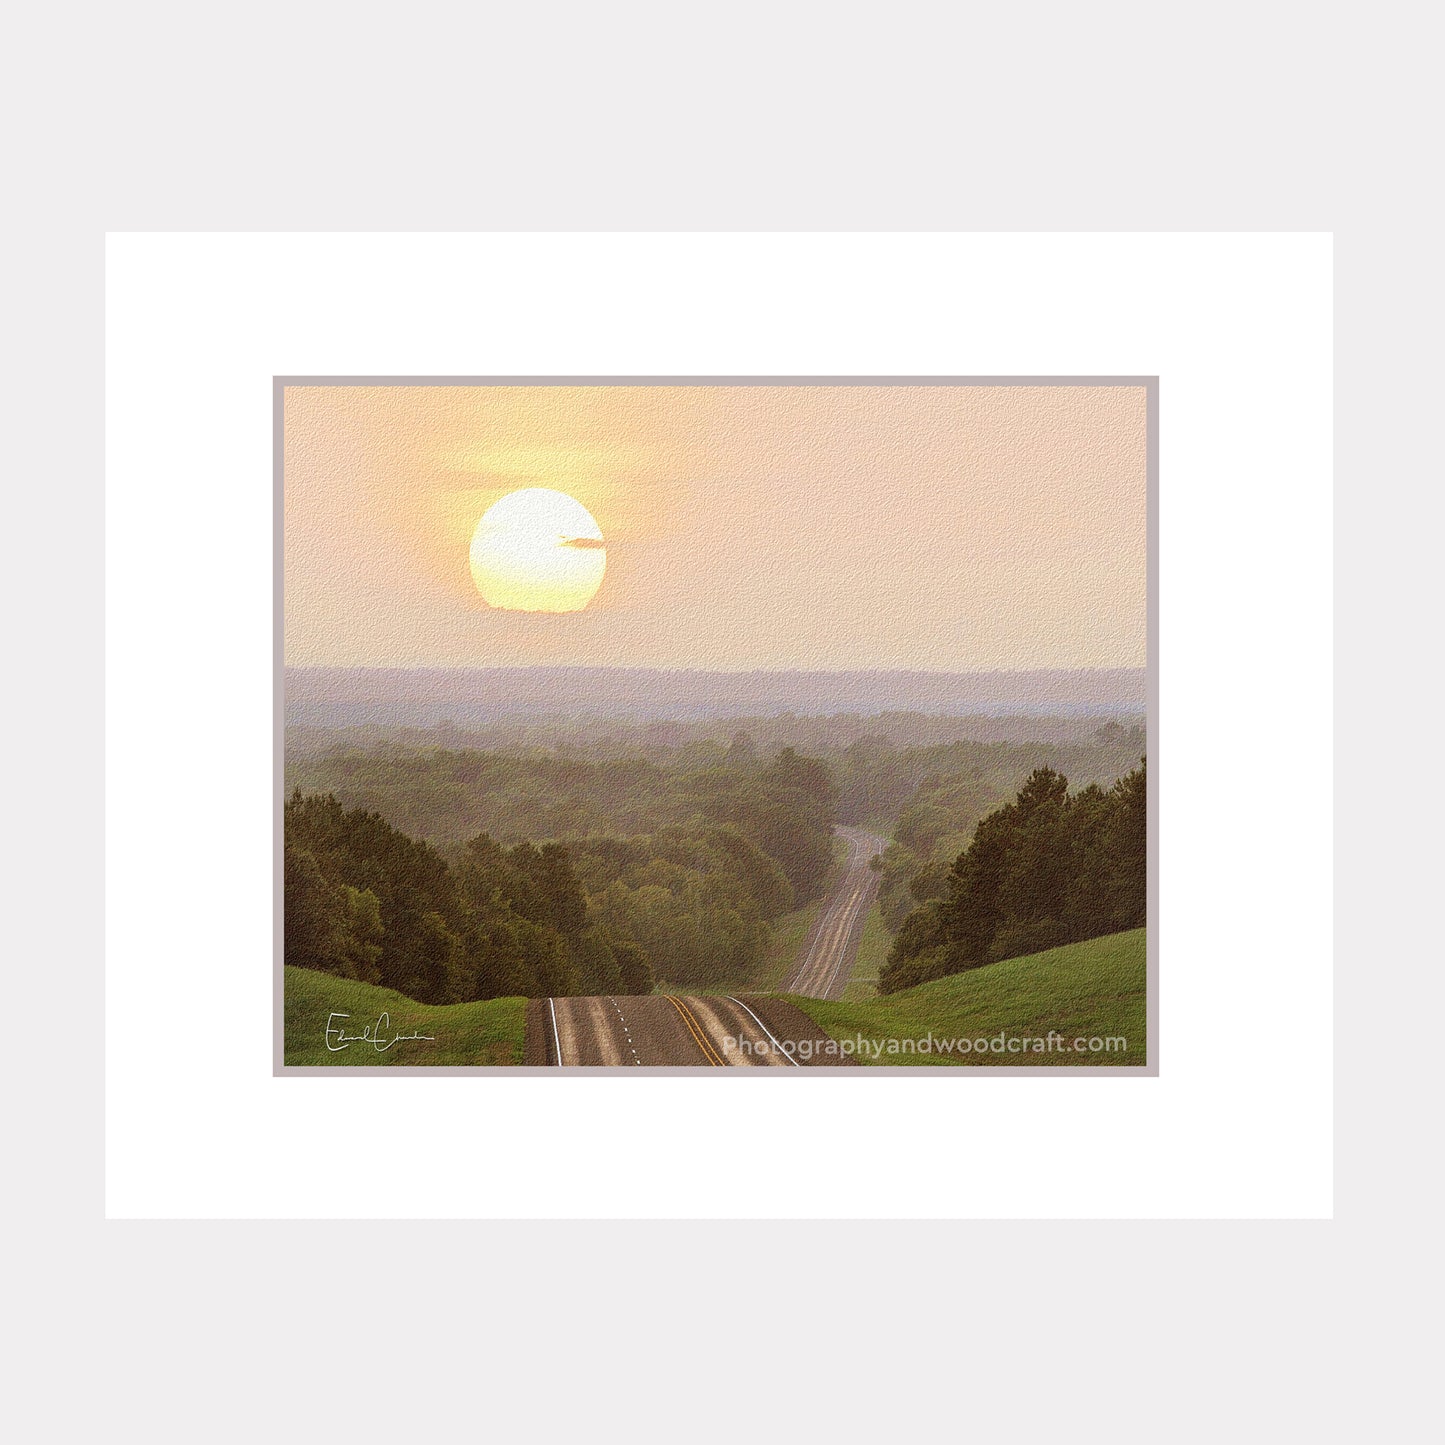 North of Nacogdoches, Texas (11" x 14") Matted Canvas Print